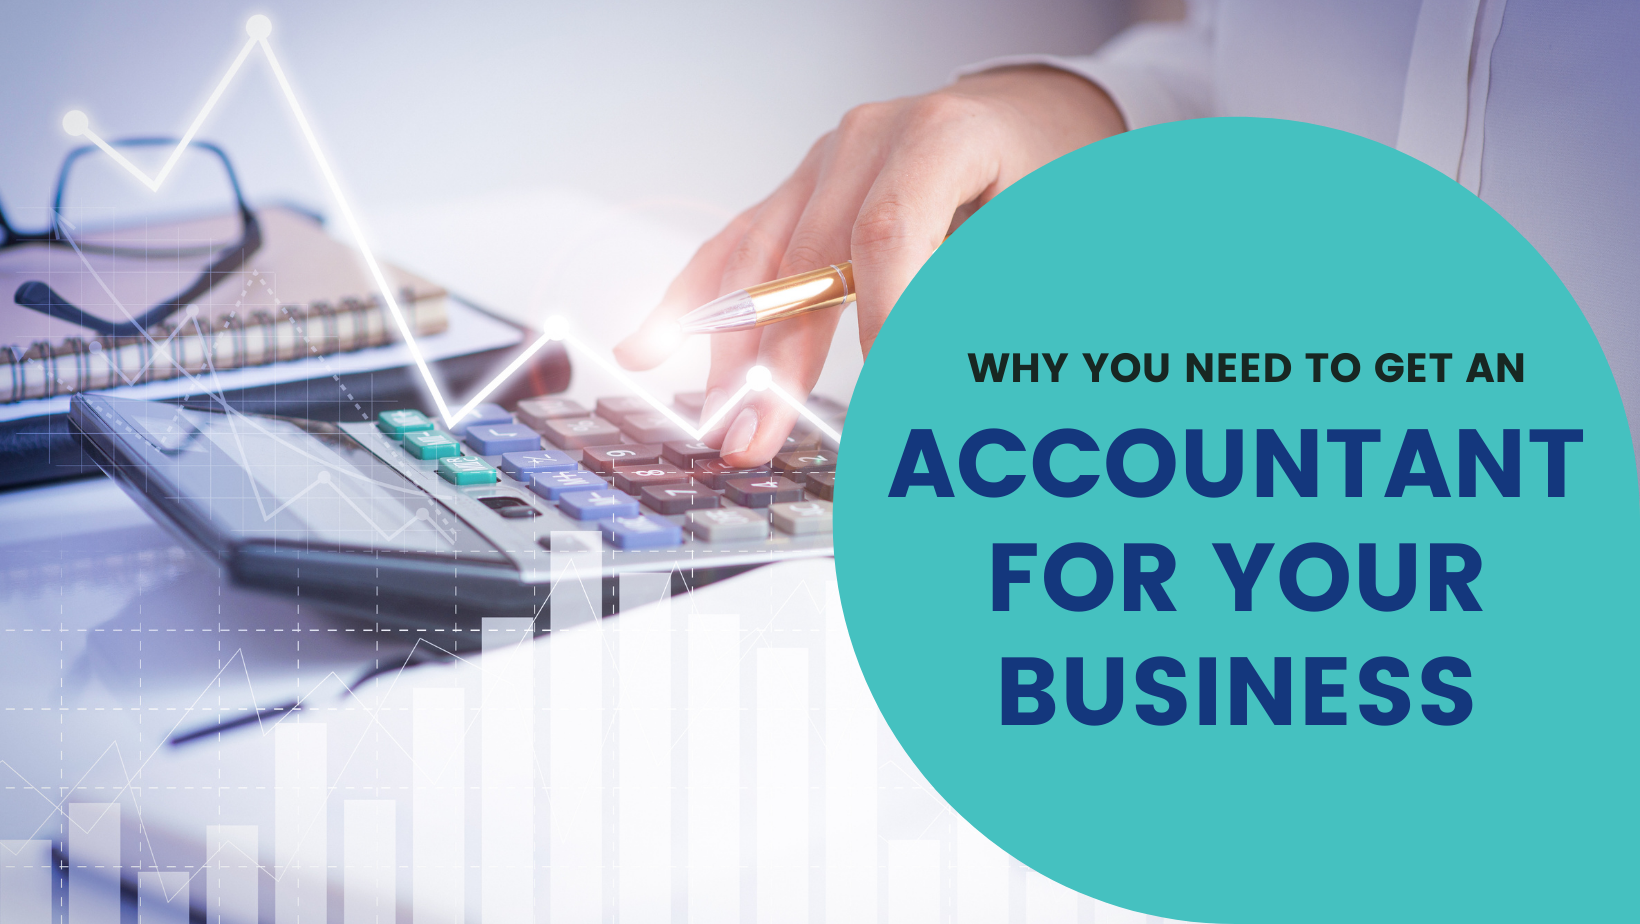 Why You Need to Get an Accountant for Your Business